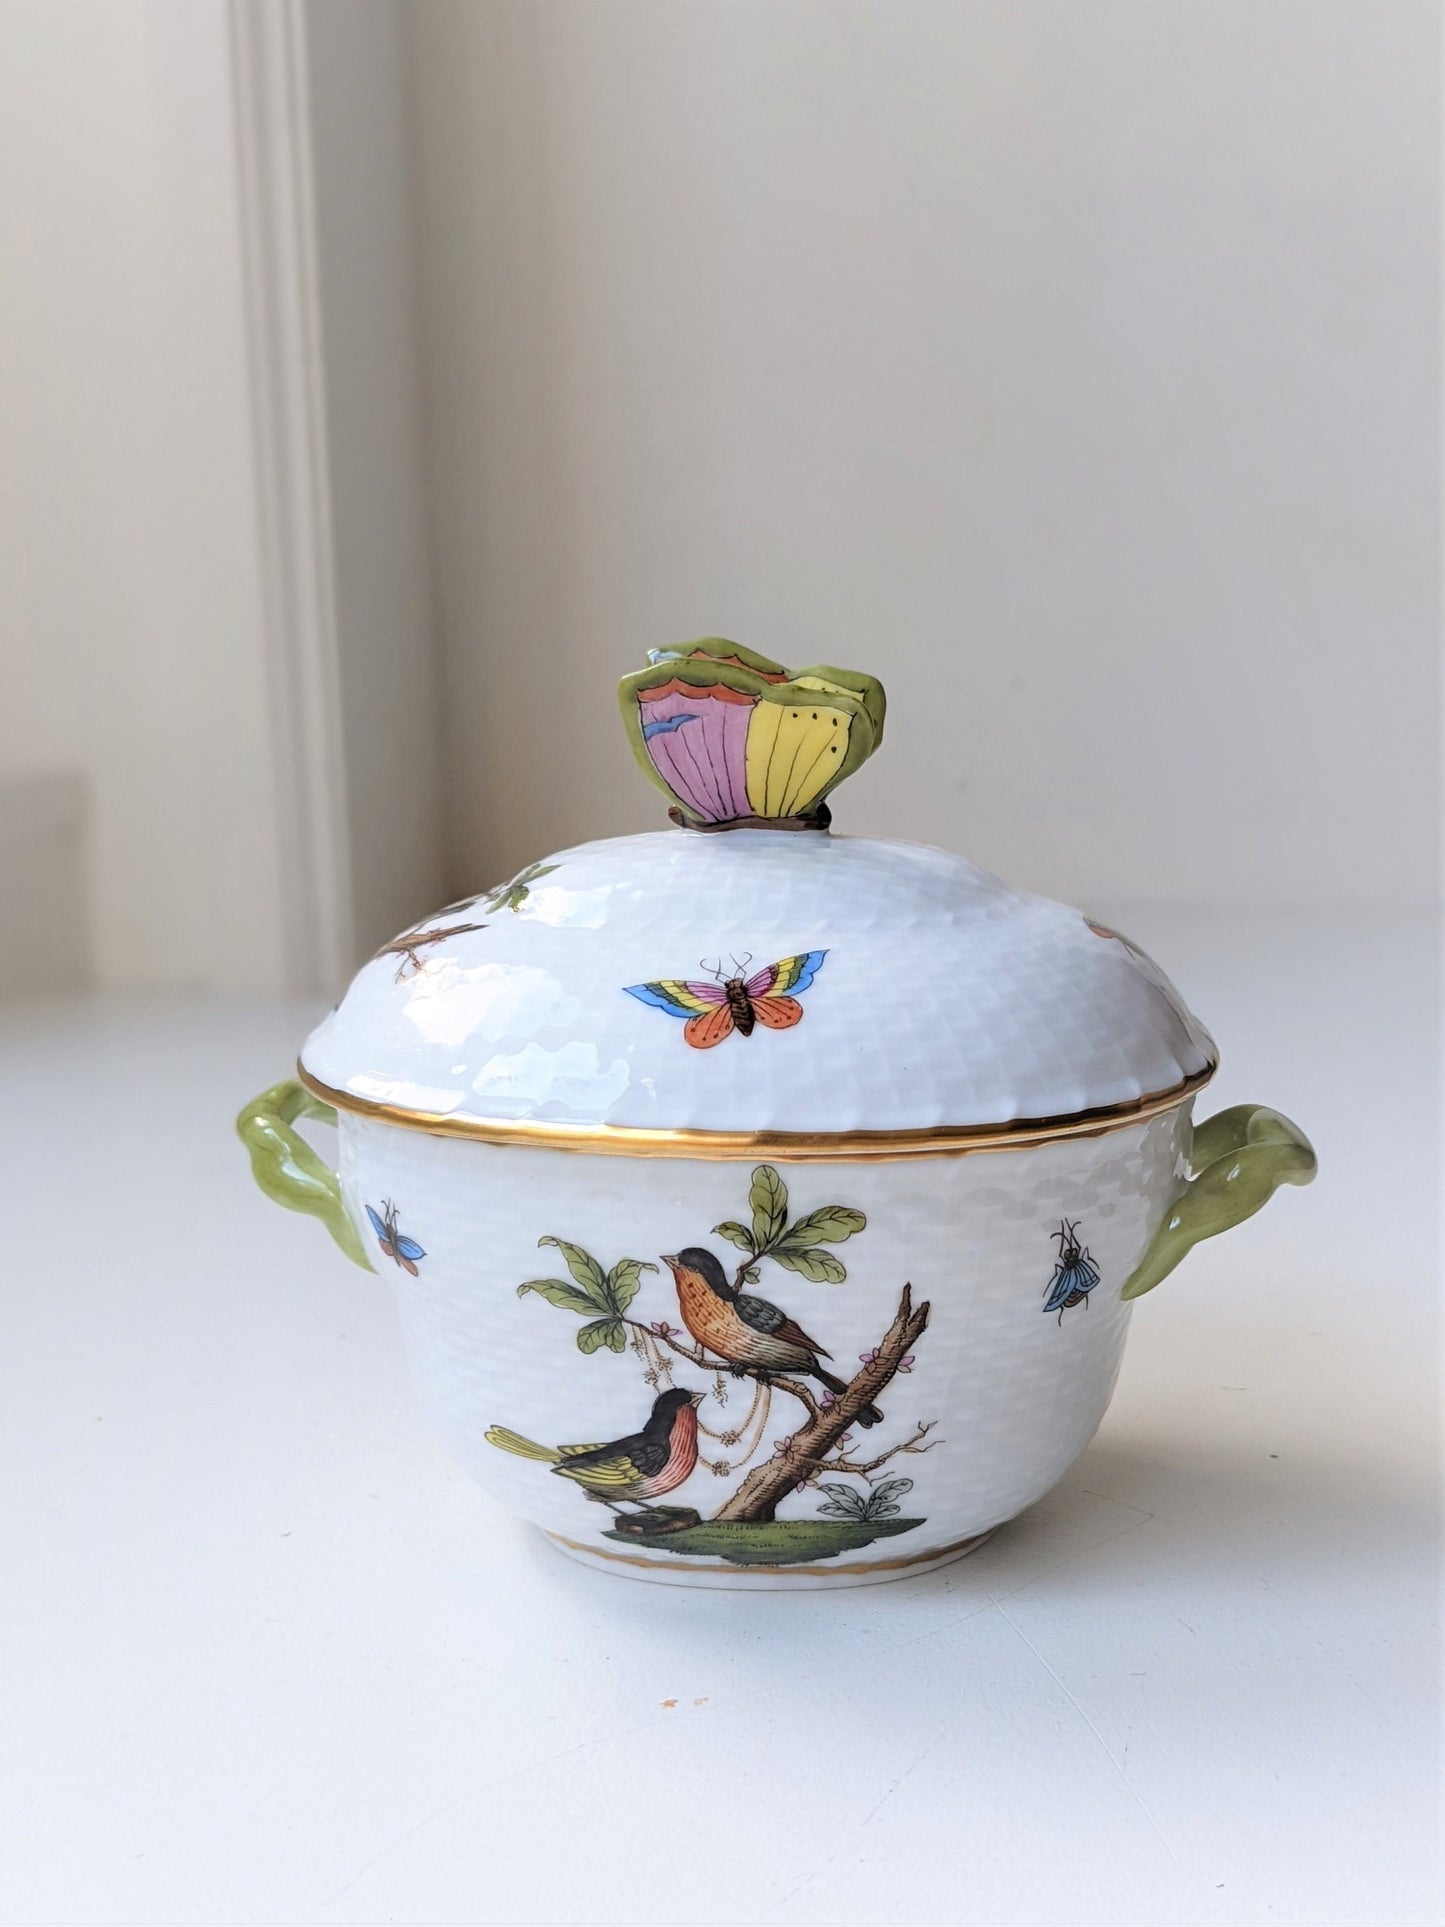 Herend Rothschild Bird Covered Bon Bon Butterfly Finial Bowl, Pettern 6018, Hand Painted, Crafted in Hungary